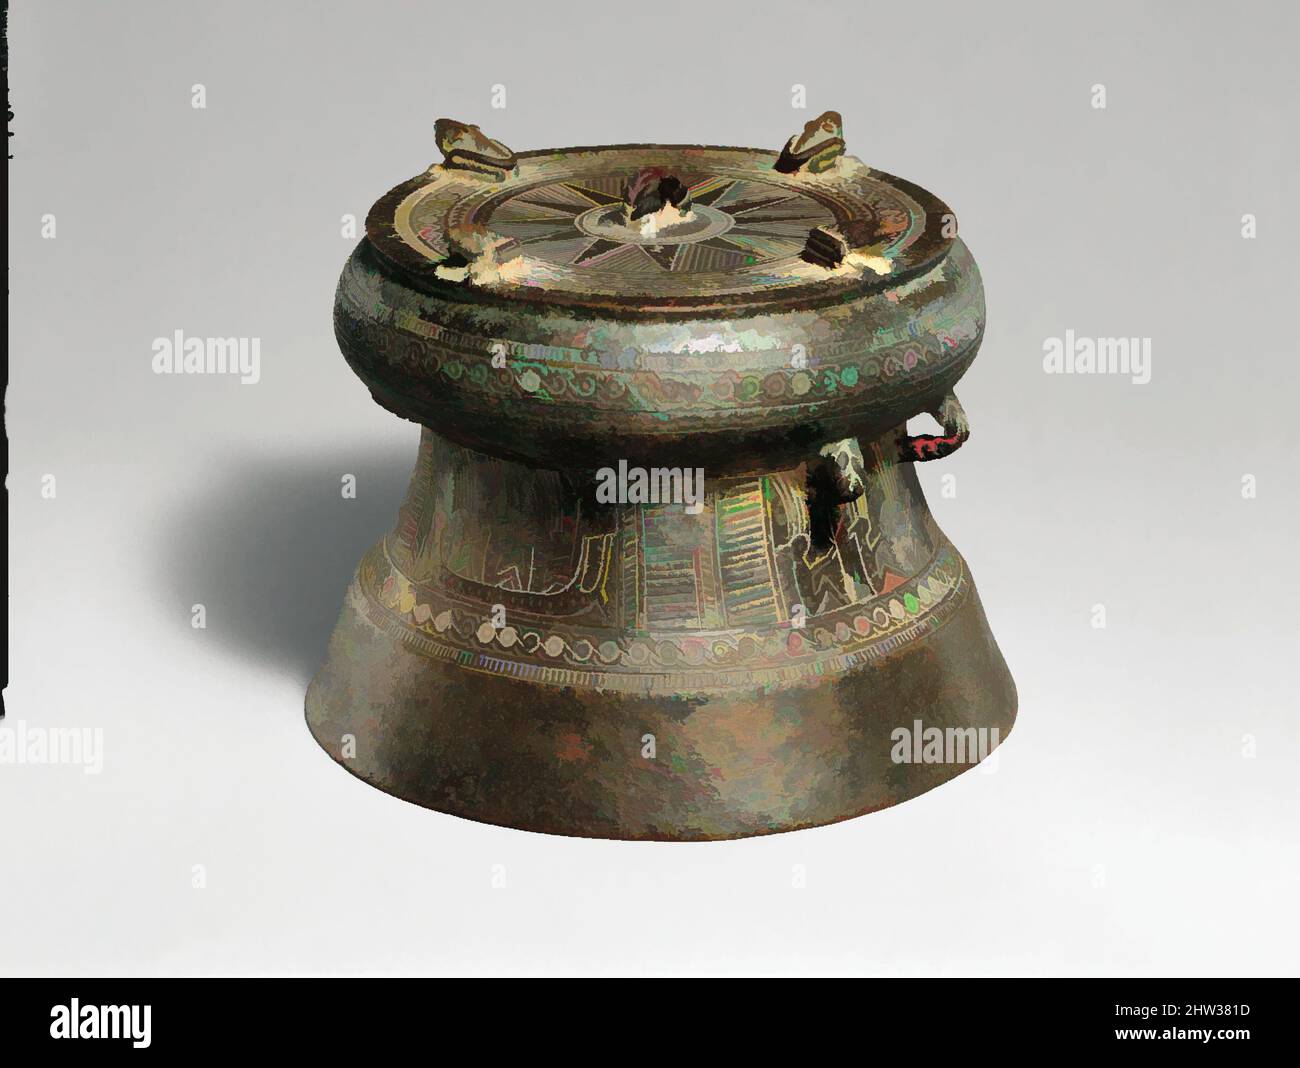 Art inspired by Miniature Drum with Four Frogs, Bronze and Iron Age period, Dongson culture, ca. 500 B.C.–A.D. 300, Vietnam, Bronze, H. 4 in. (10.2 cm), Metalwork, Ranging in height from a few inches to over six feet, up to four feet in diameter, and often of considerable weight, drums, Classic works modernized by Artotop with a splash of modernity. Shapes, color and value, eye-catching visual impact on art. Emotions through freedom of artworks in a contemporary way. A timeless message pursuing a wildly creative new direction. Artists turning to the digital medium and creating the Artotop NFT Stock Photo